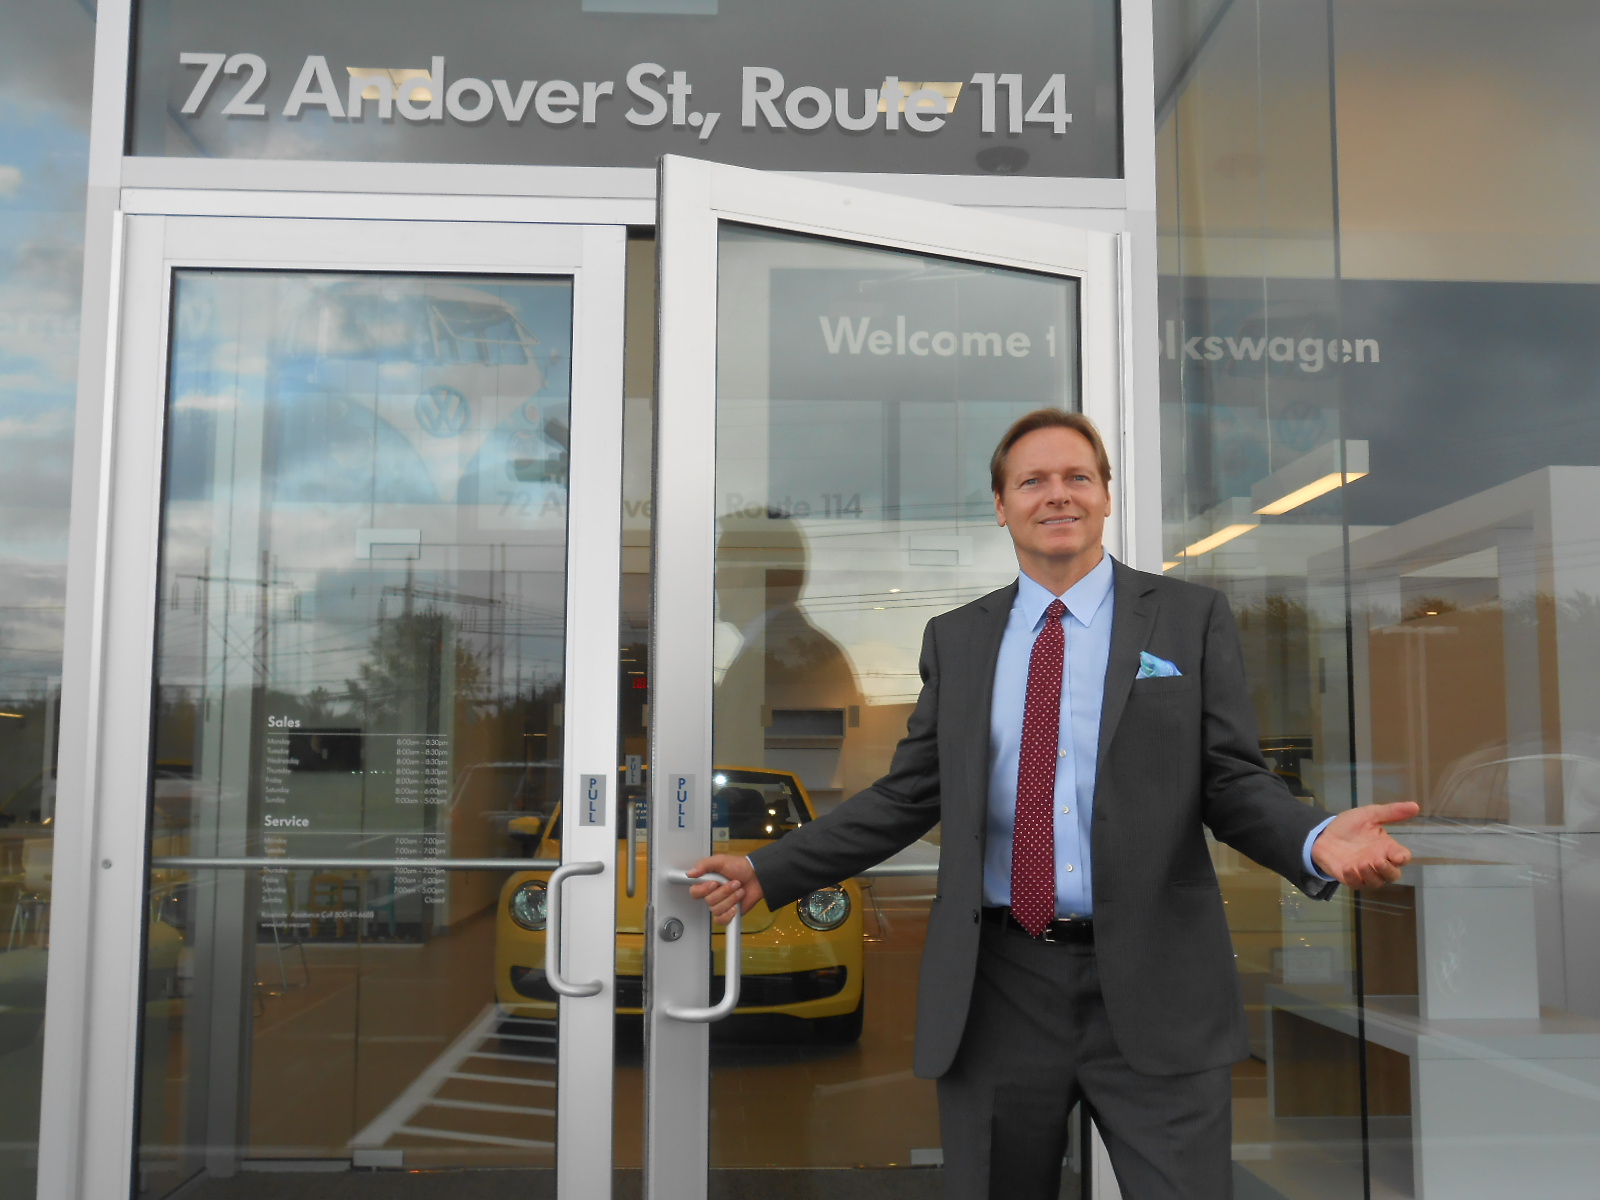 Kelly Auto President Brian Kelly personally would like to welcome you to our Kelly Volkswagen dealership! We are located at 72 Andover St. on Route 114 in Danvers, MA. Visit us today for any of your automotive needs, new, pre-owned, service, or parts!